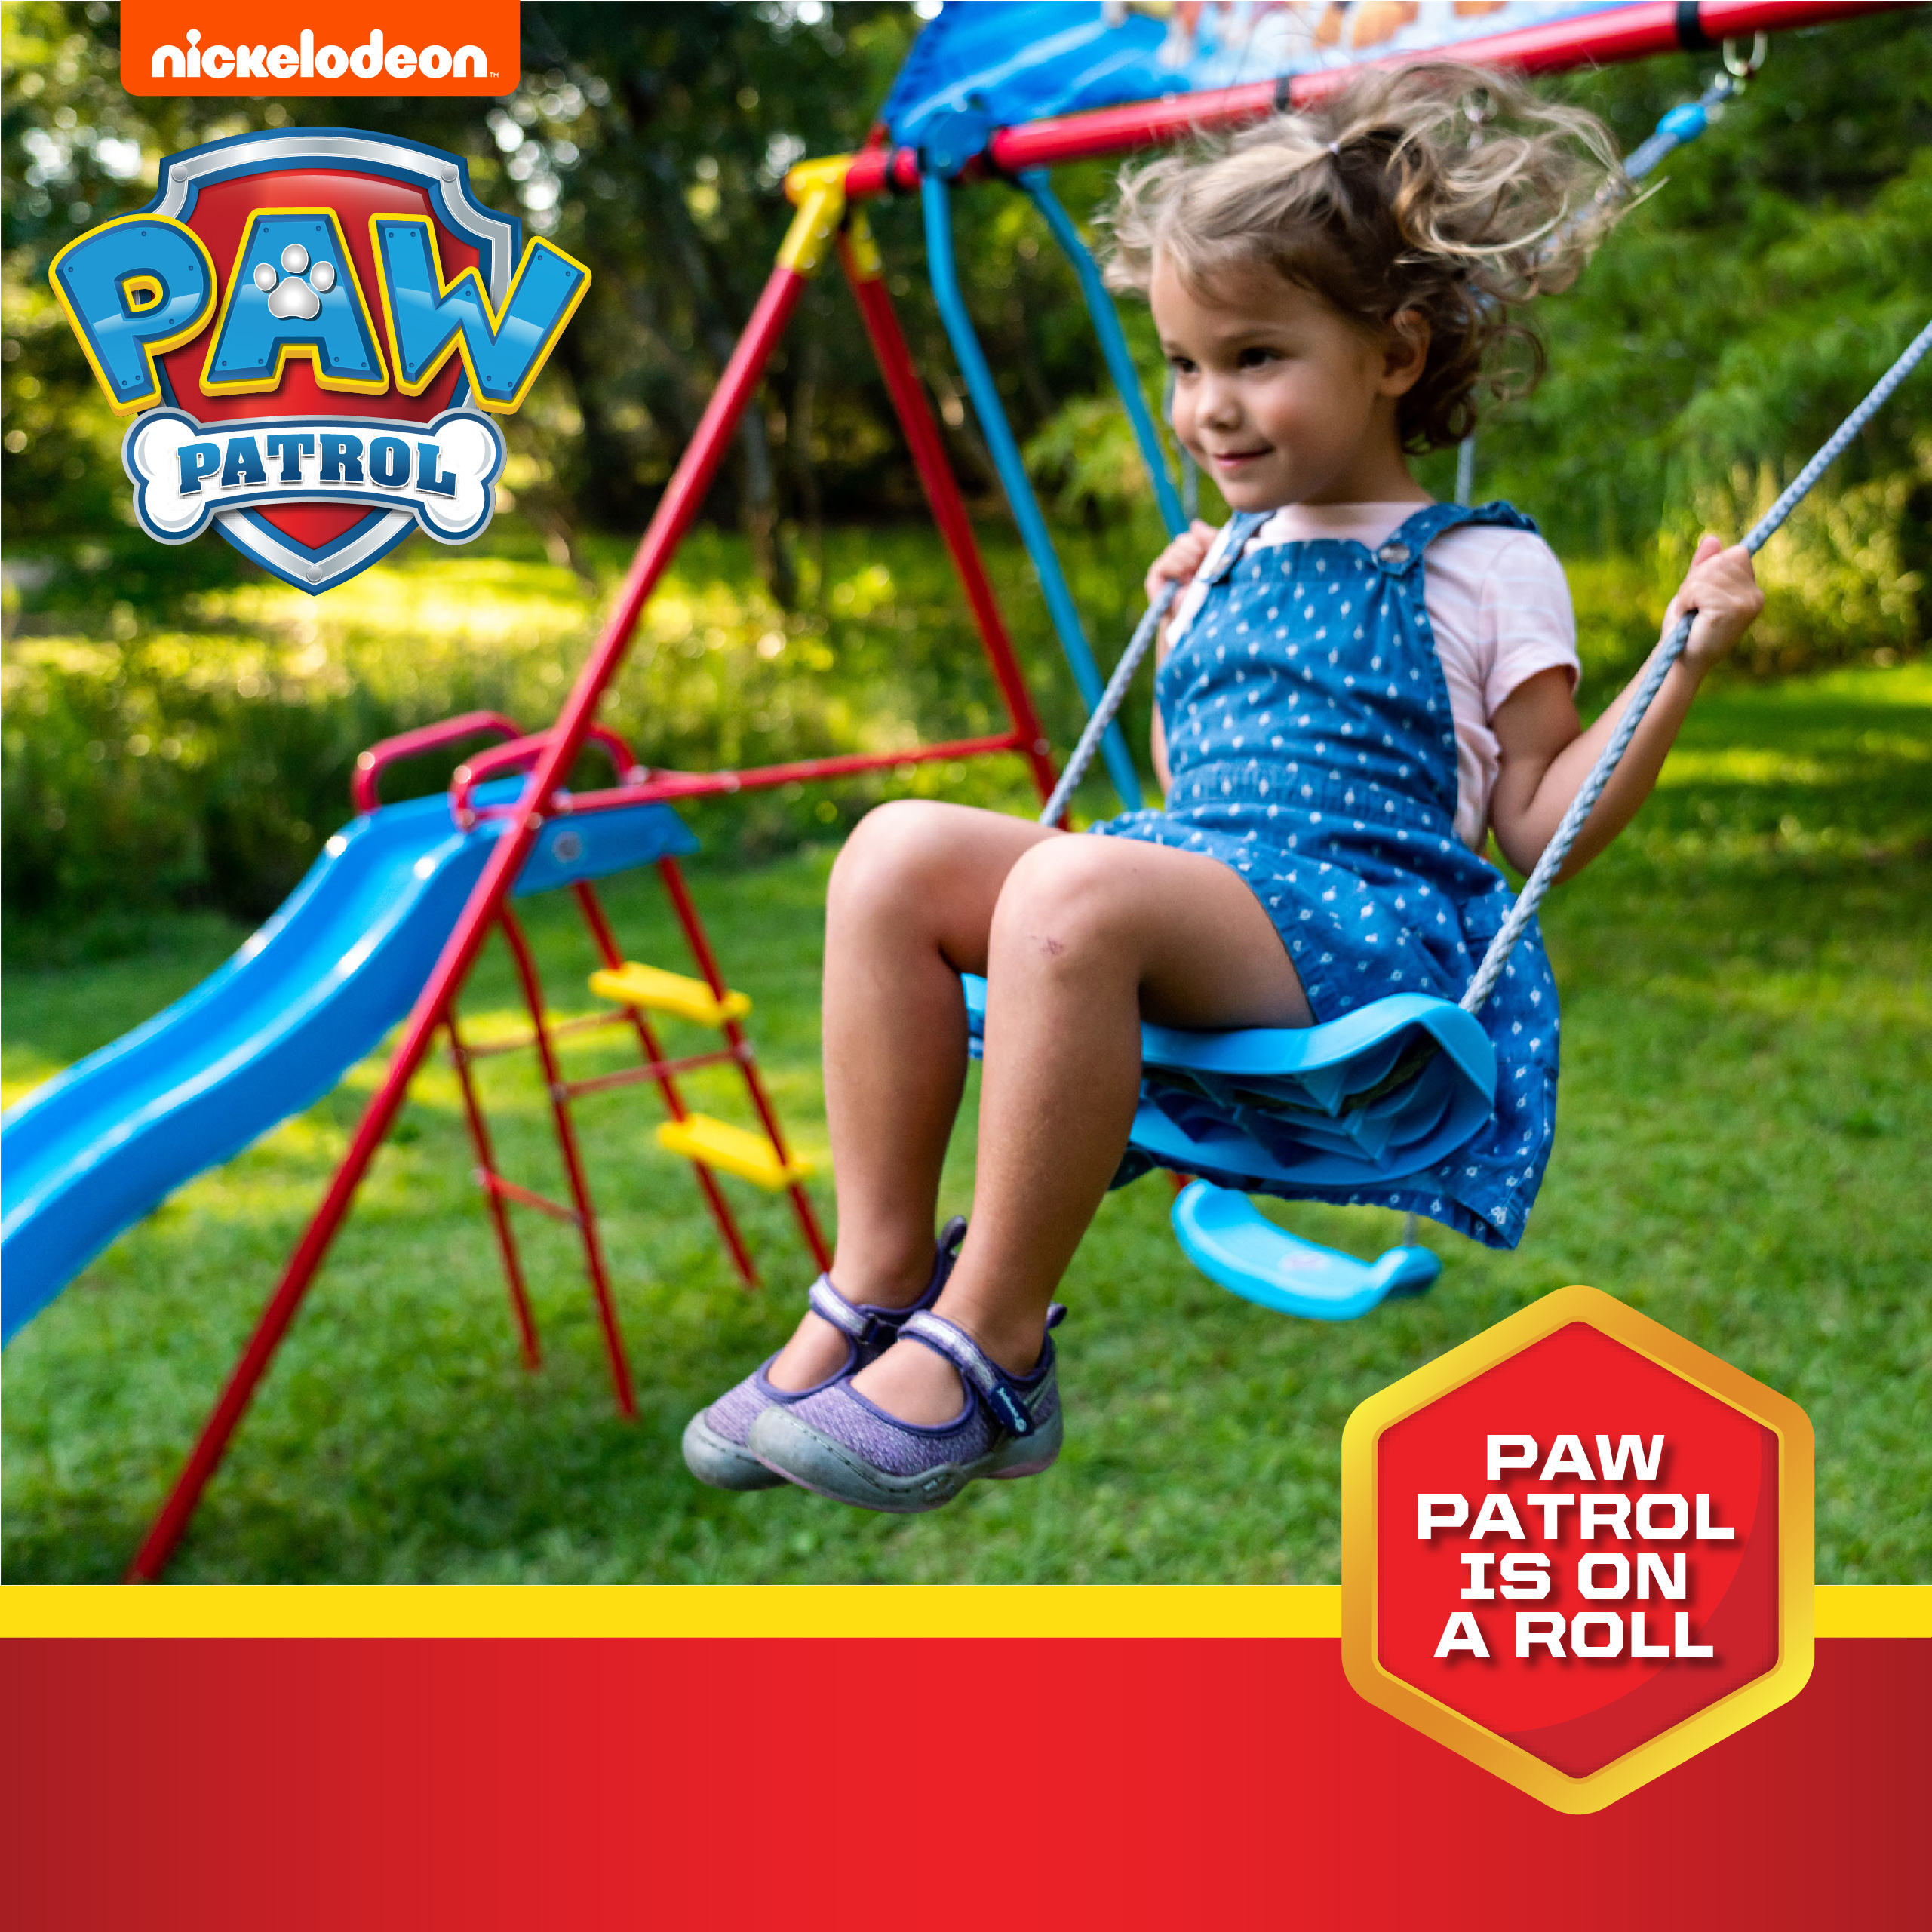 Swurfer Paw Patrol Deluxe Swing Set for Kids, Ages 4 and Up - image 3 of 7